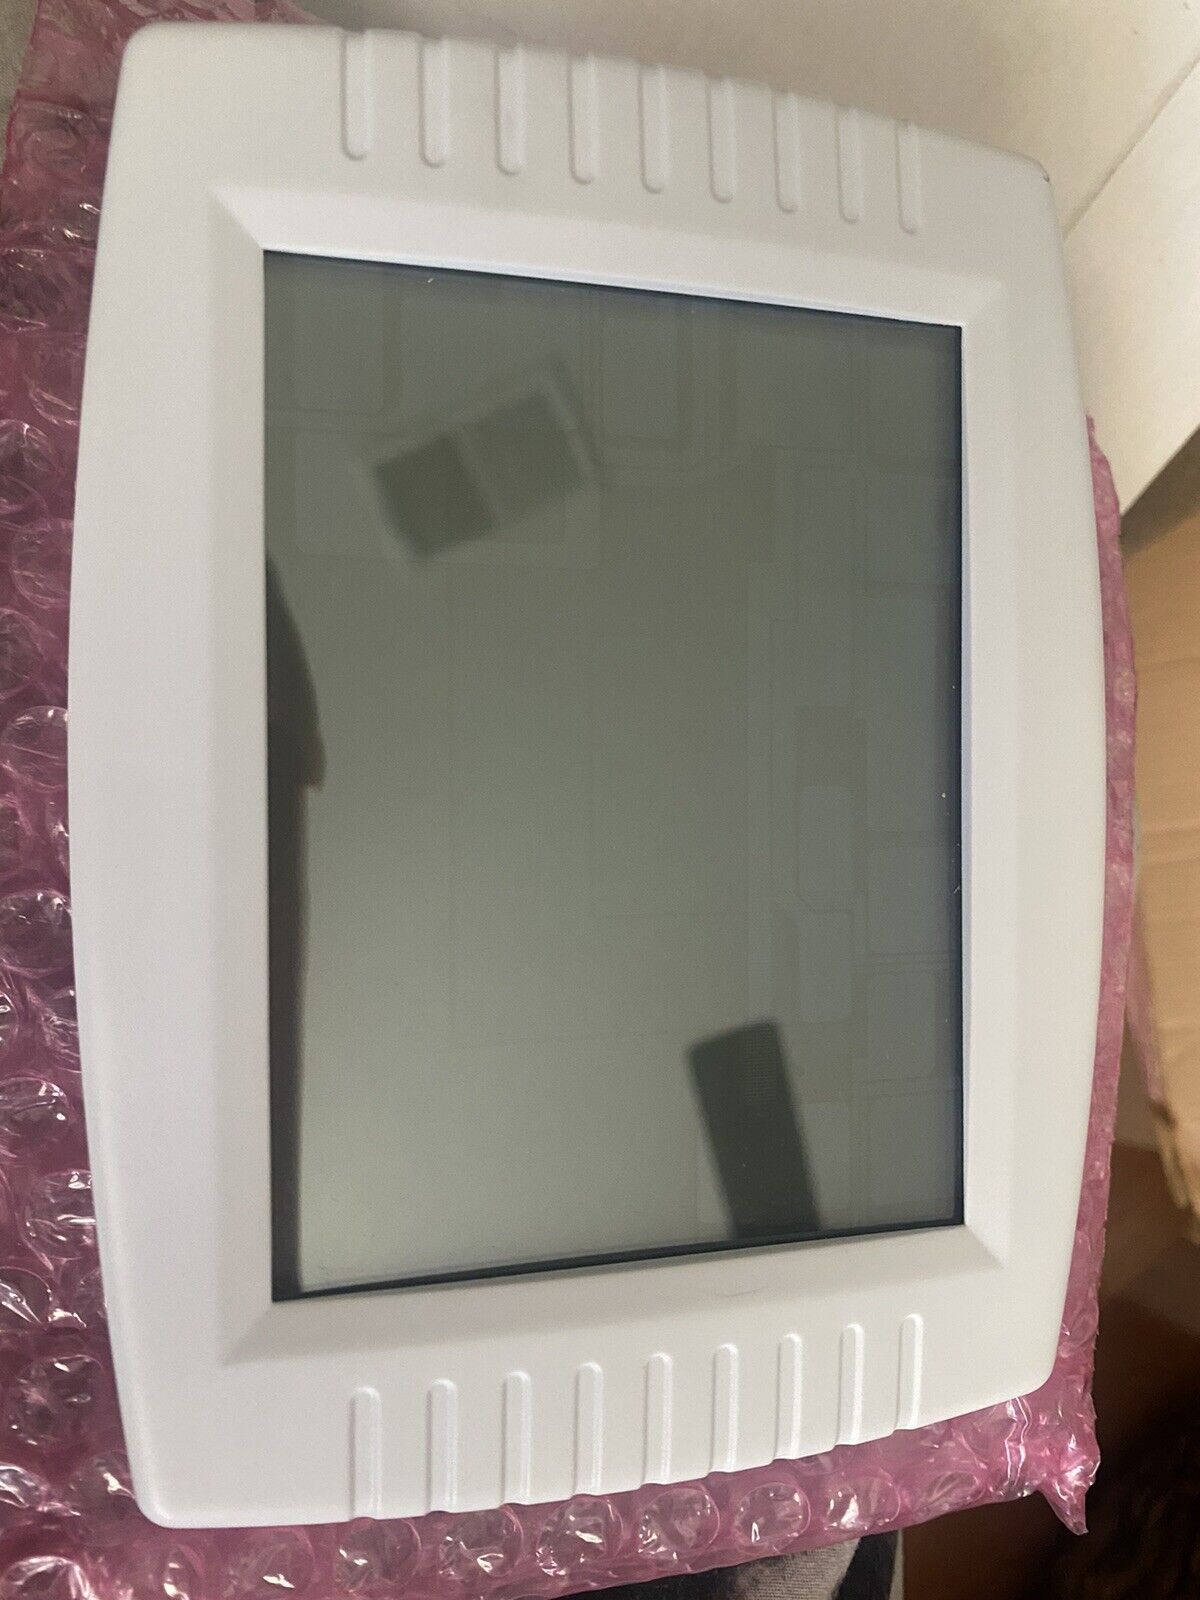 A3103 touchscreen programmable thermostat, 7 Day Programmable